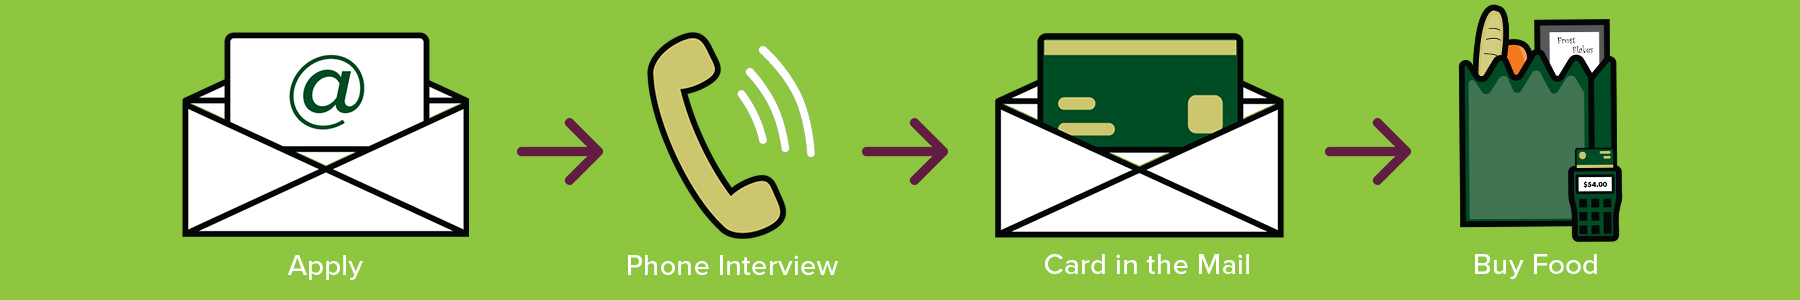 Image of an email, phone, envelope, and grocery bag icon demonstrating the SNAP process.